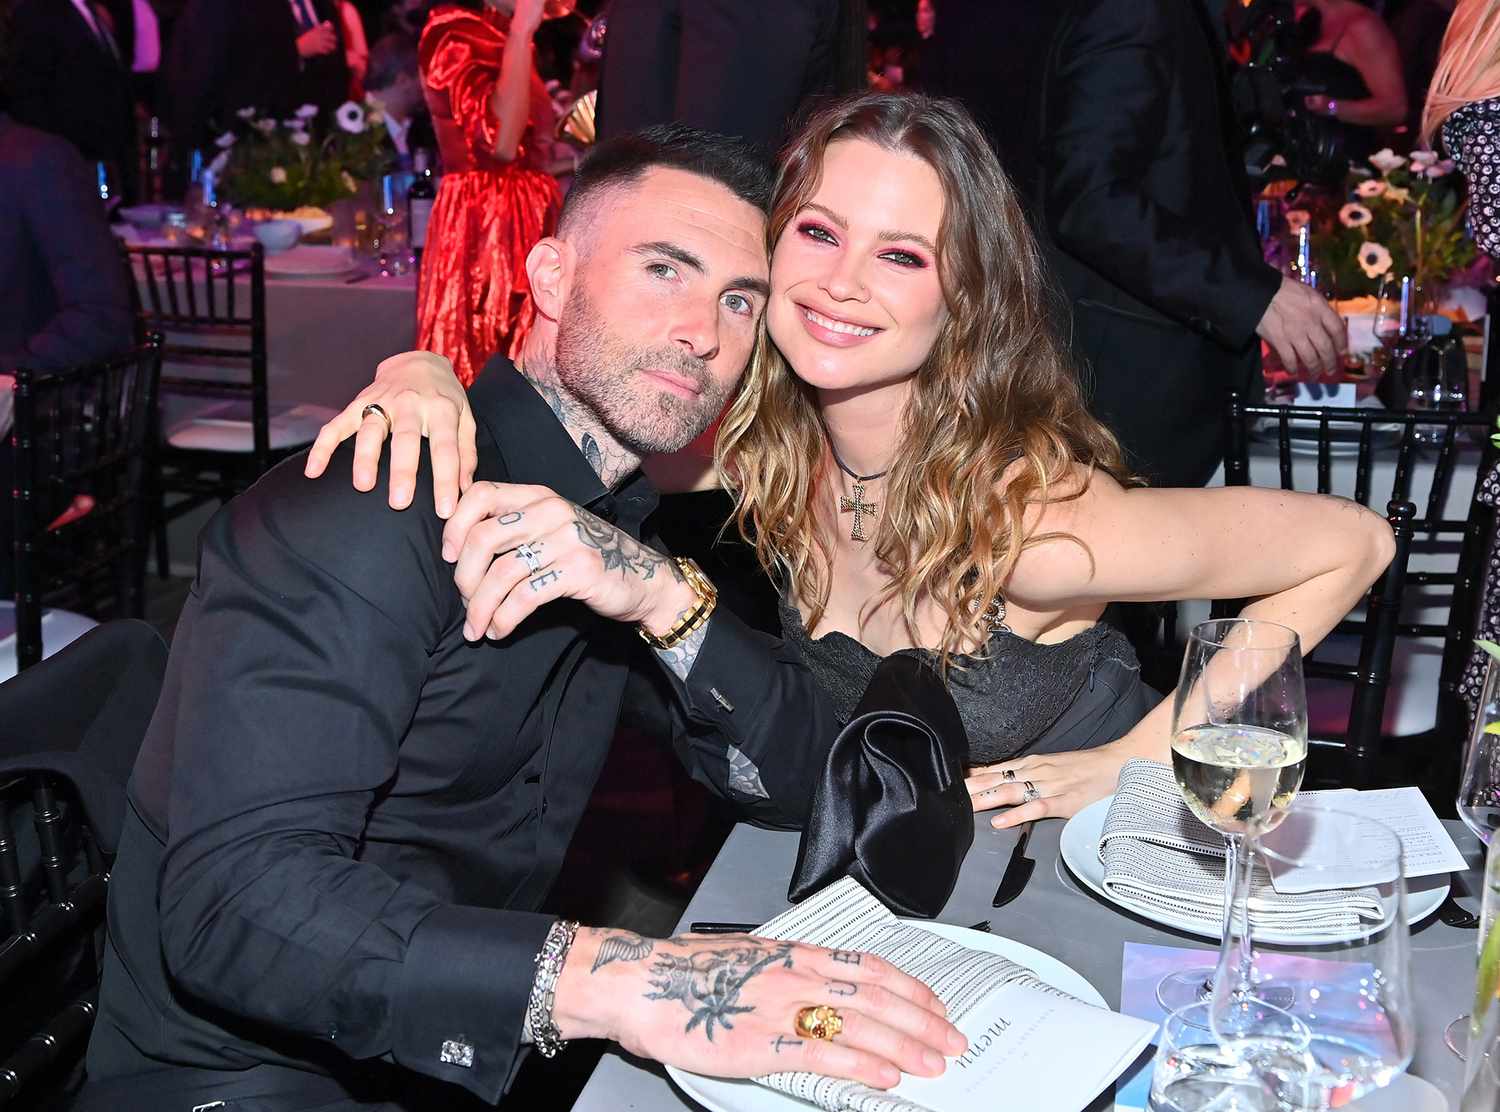 Adam Levine and Behati Prinsloo attend the Baby2Baby 10-Year Gala presented by Paul Mitchell on November 13, 2021 in West Hollywood, California